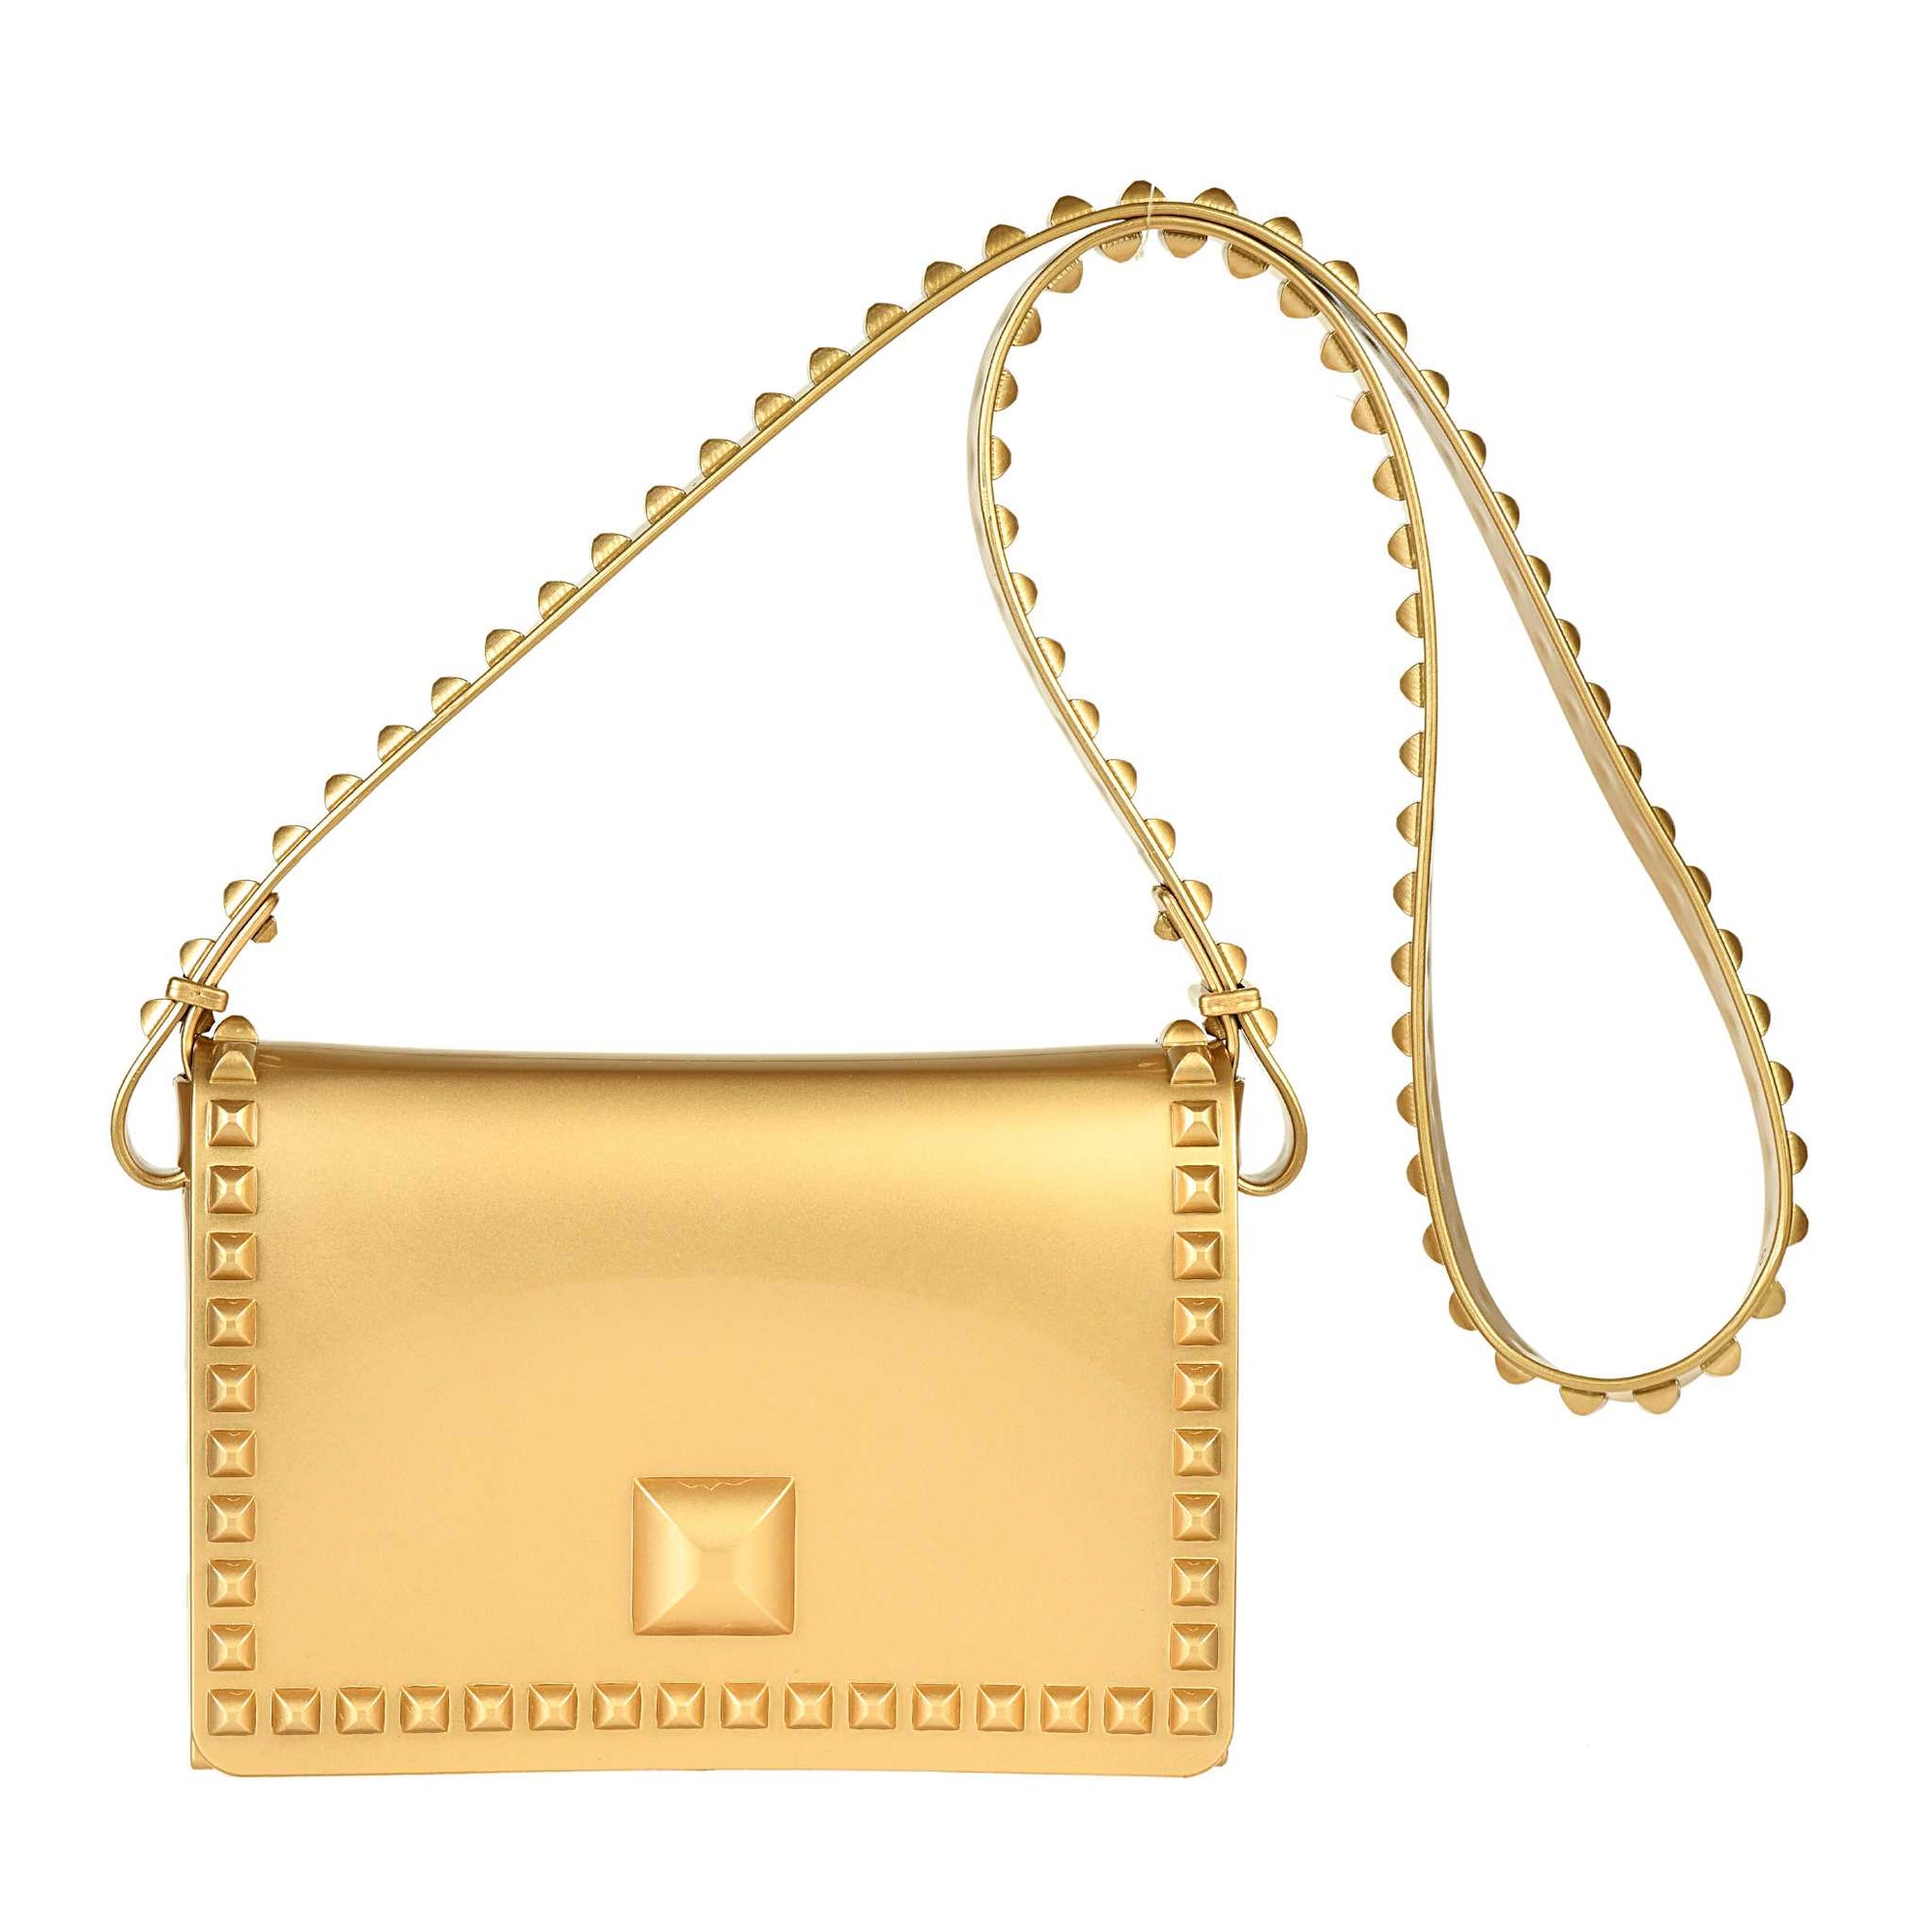 Jelly crossbody purse with studs in color gold